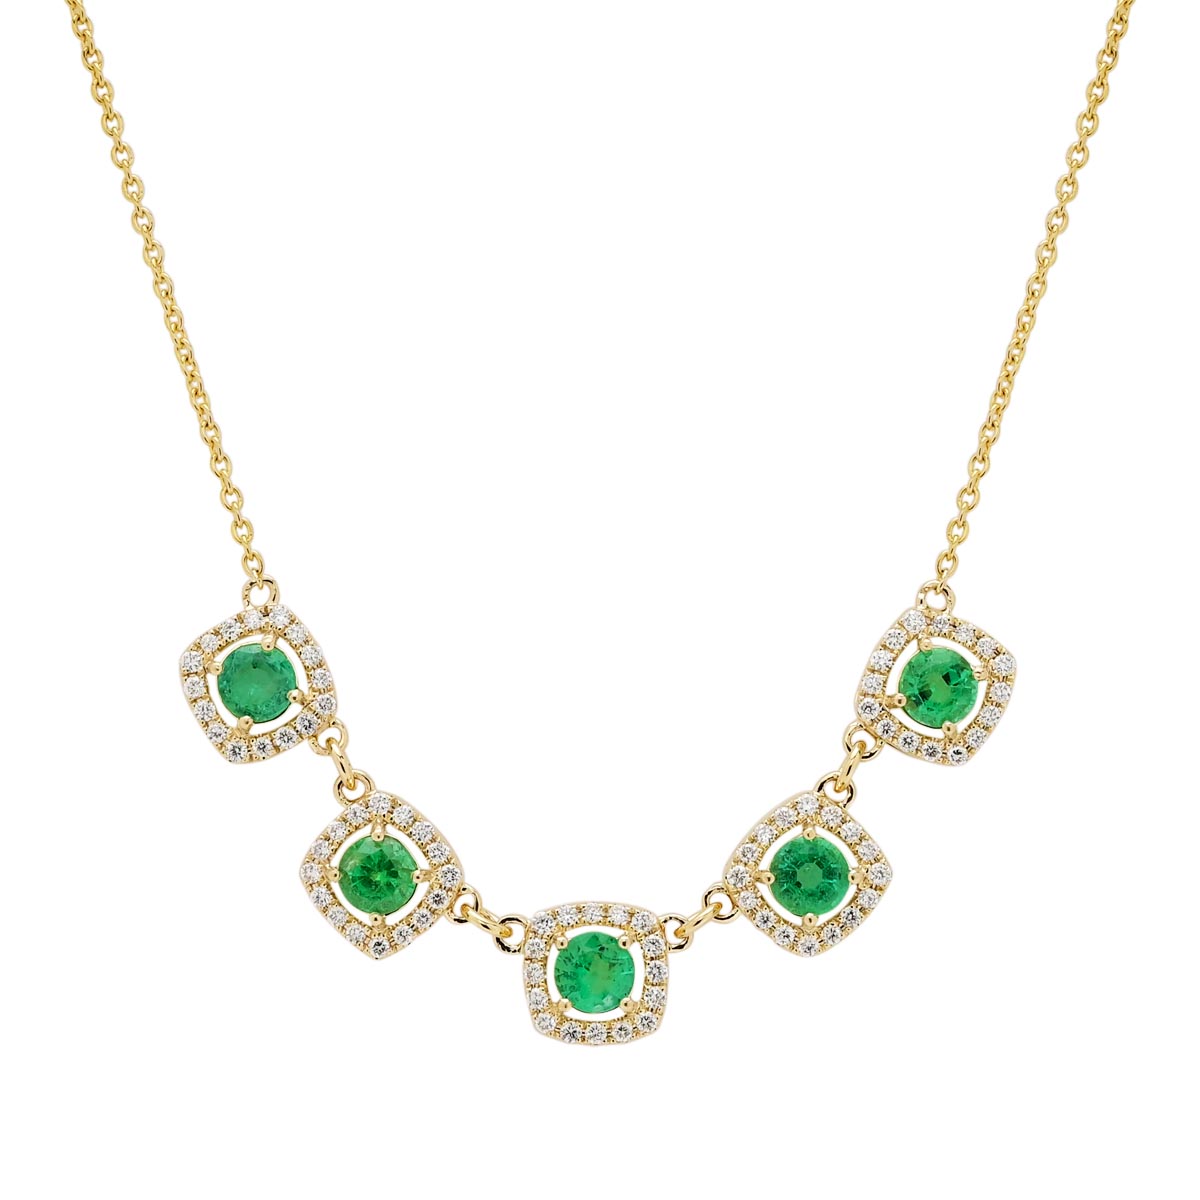 Emerald Necklace in 14kt Yellow Gold with Diamonds (1/3ct tw)